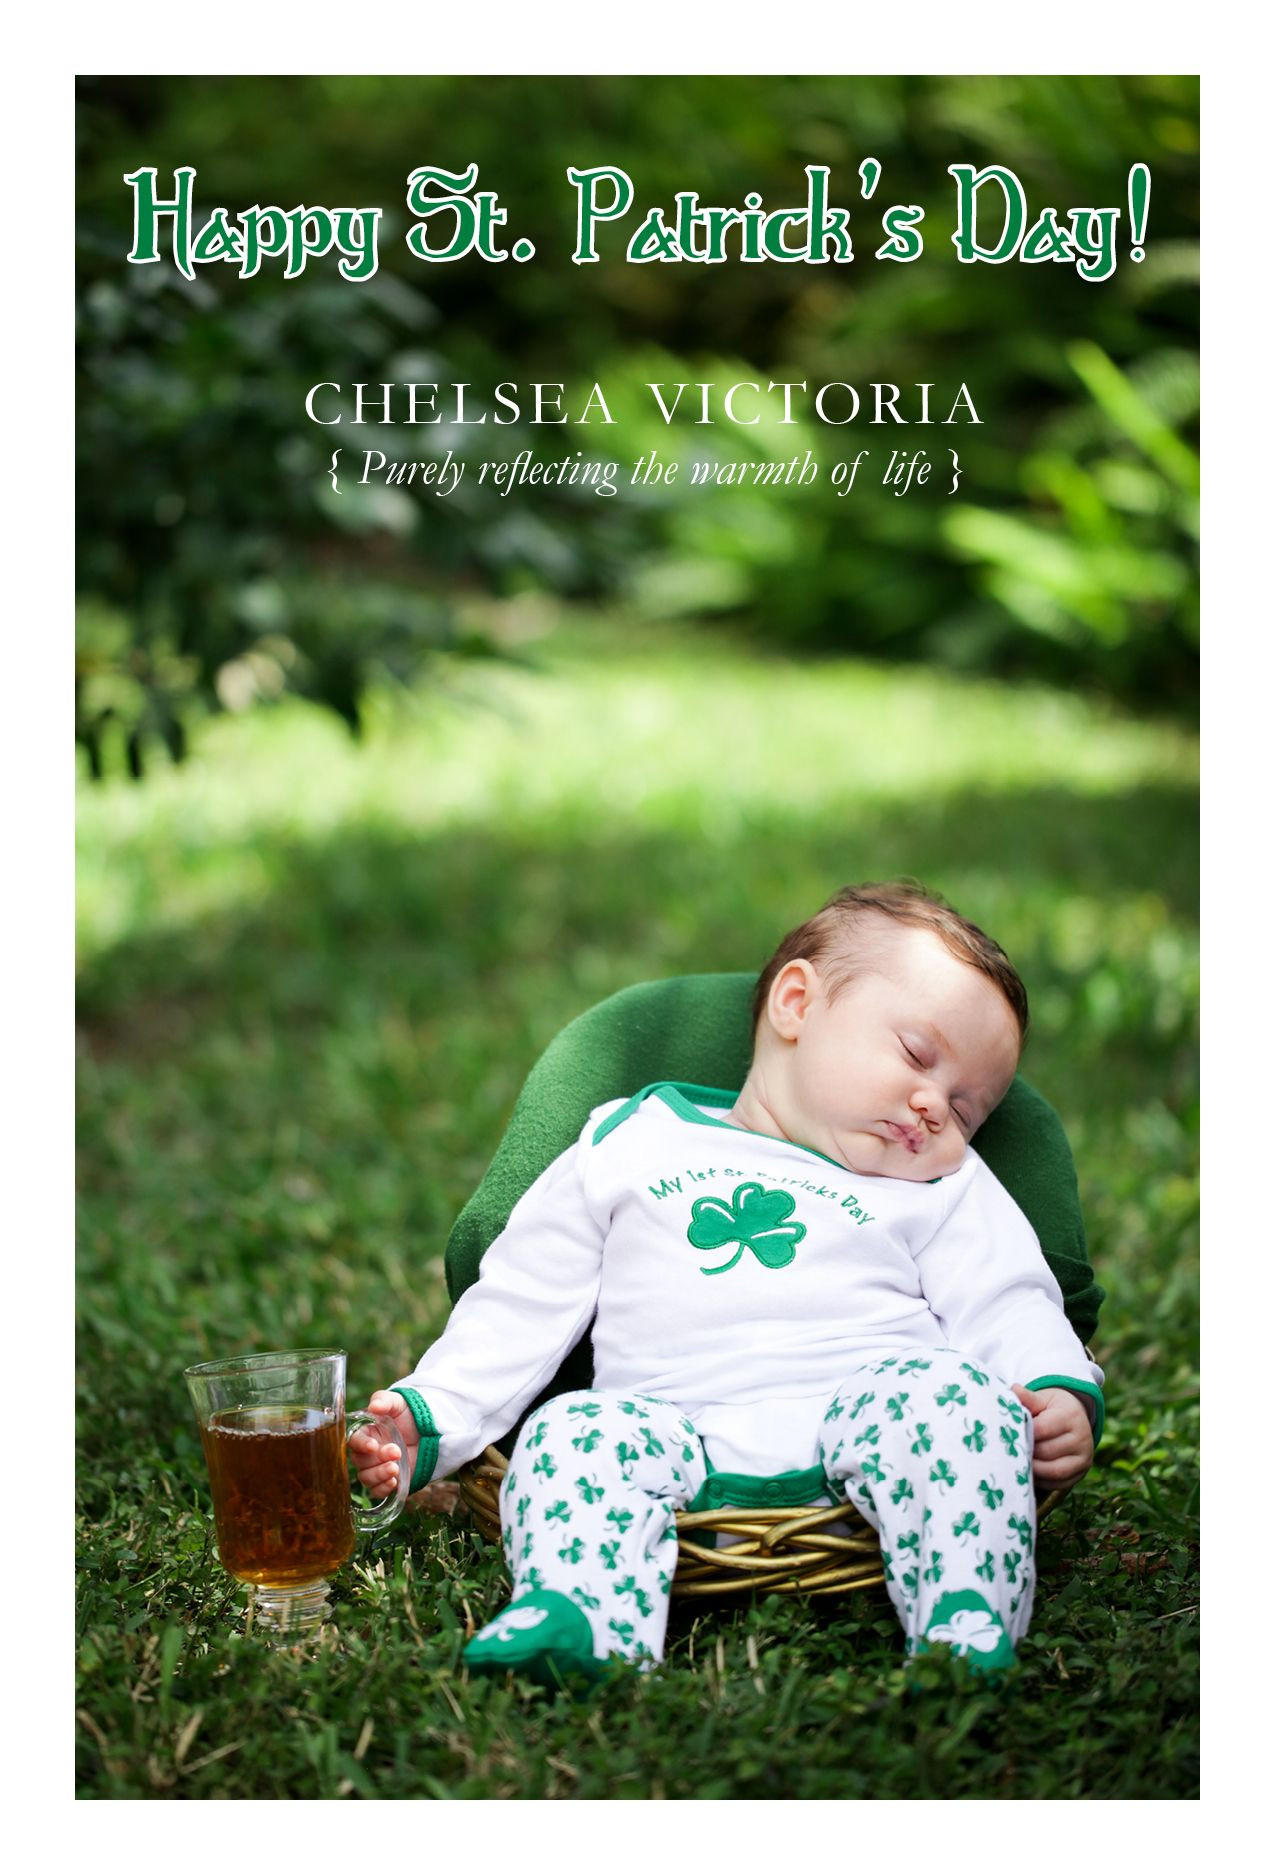 St Patrick's Day Baby Picture Ideas
 St Patrick s Day Newborn Shoot by Chelsea Victoria